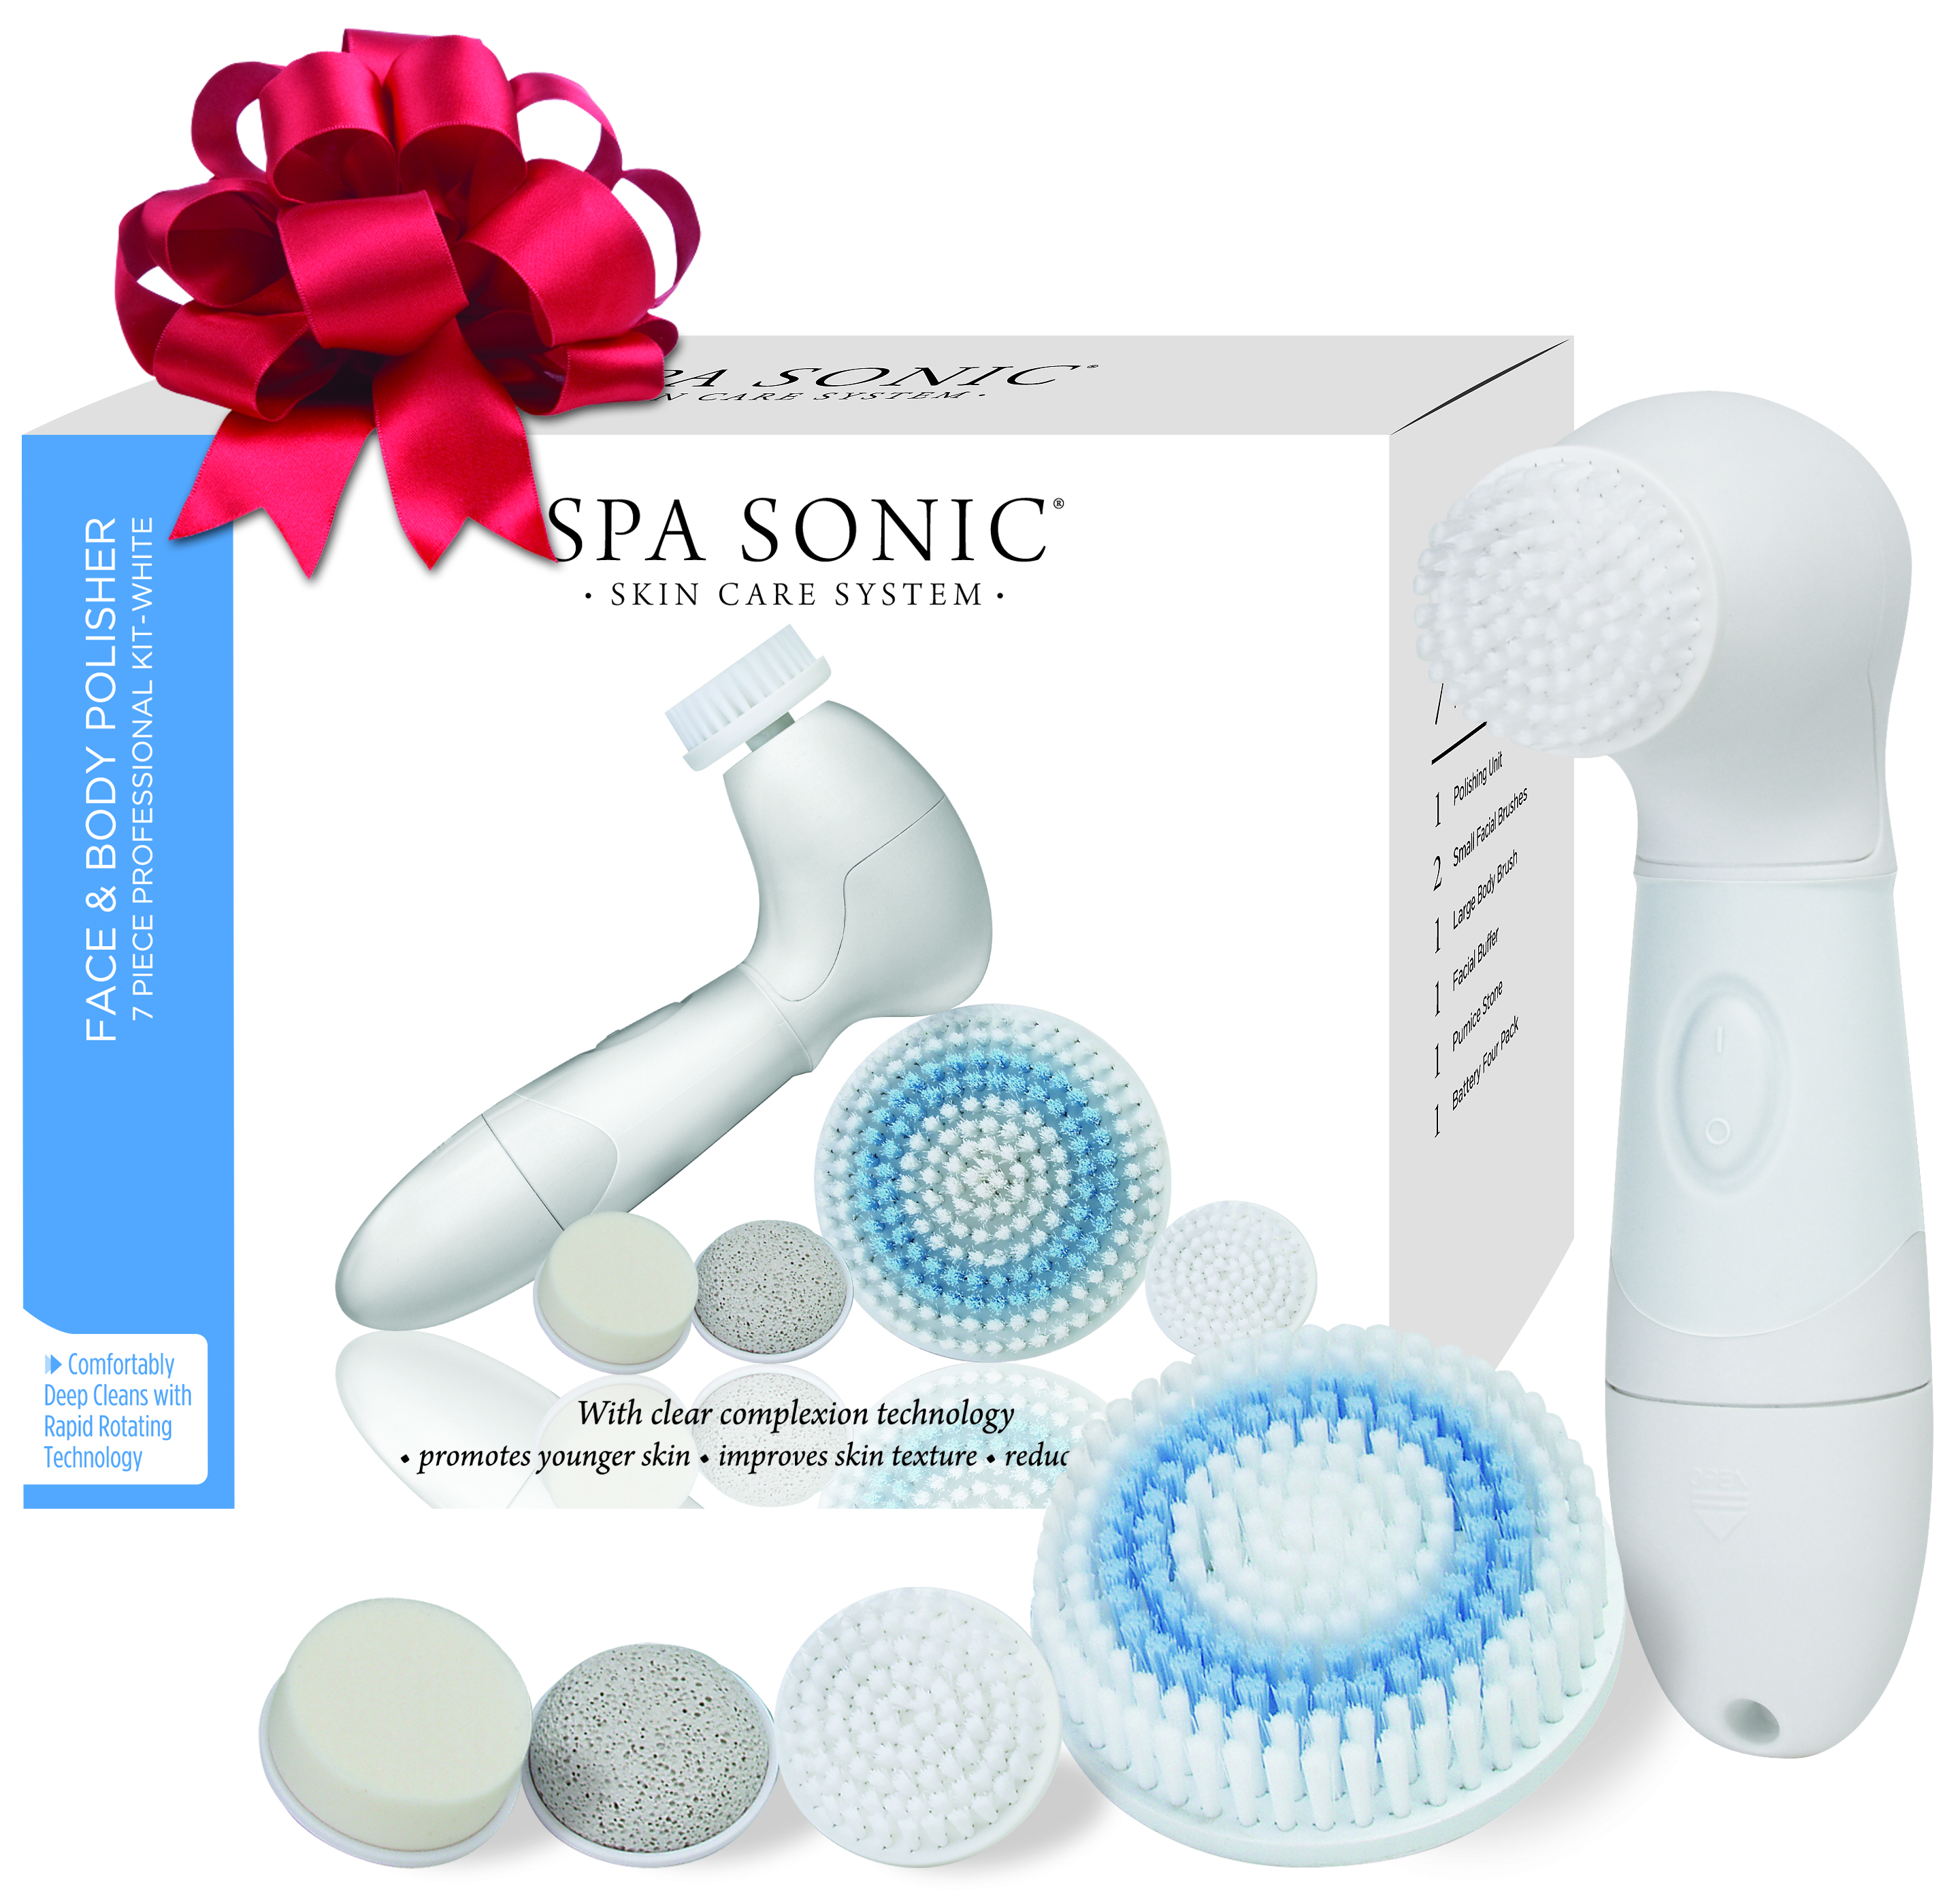 Spa Sonic Mother’s Day Giveaway!